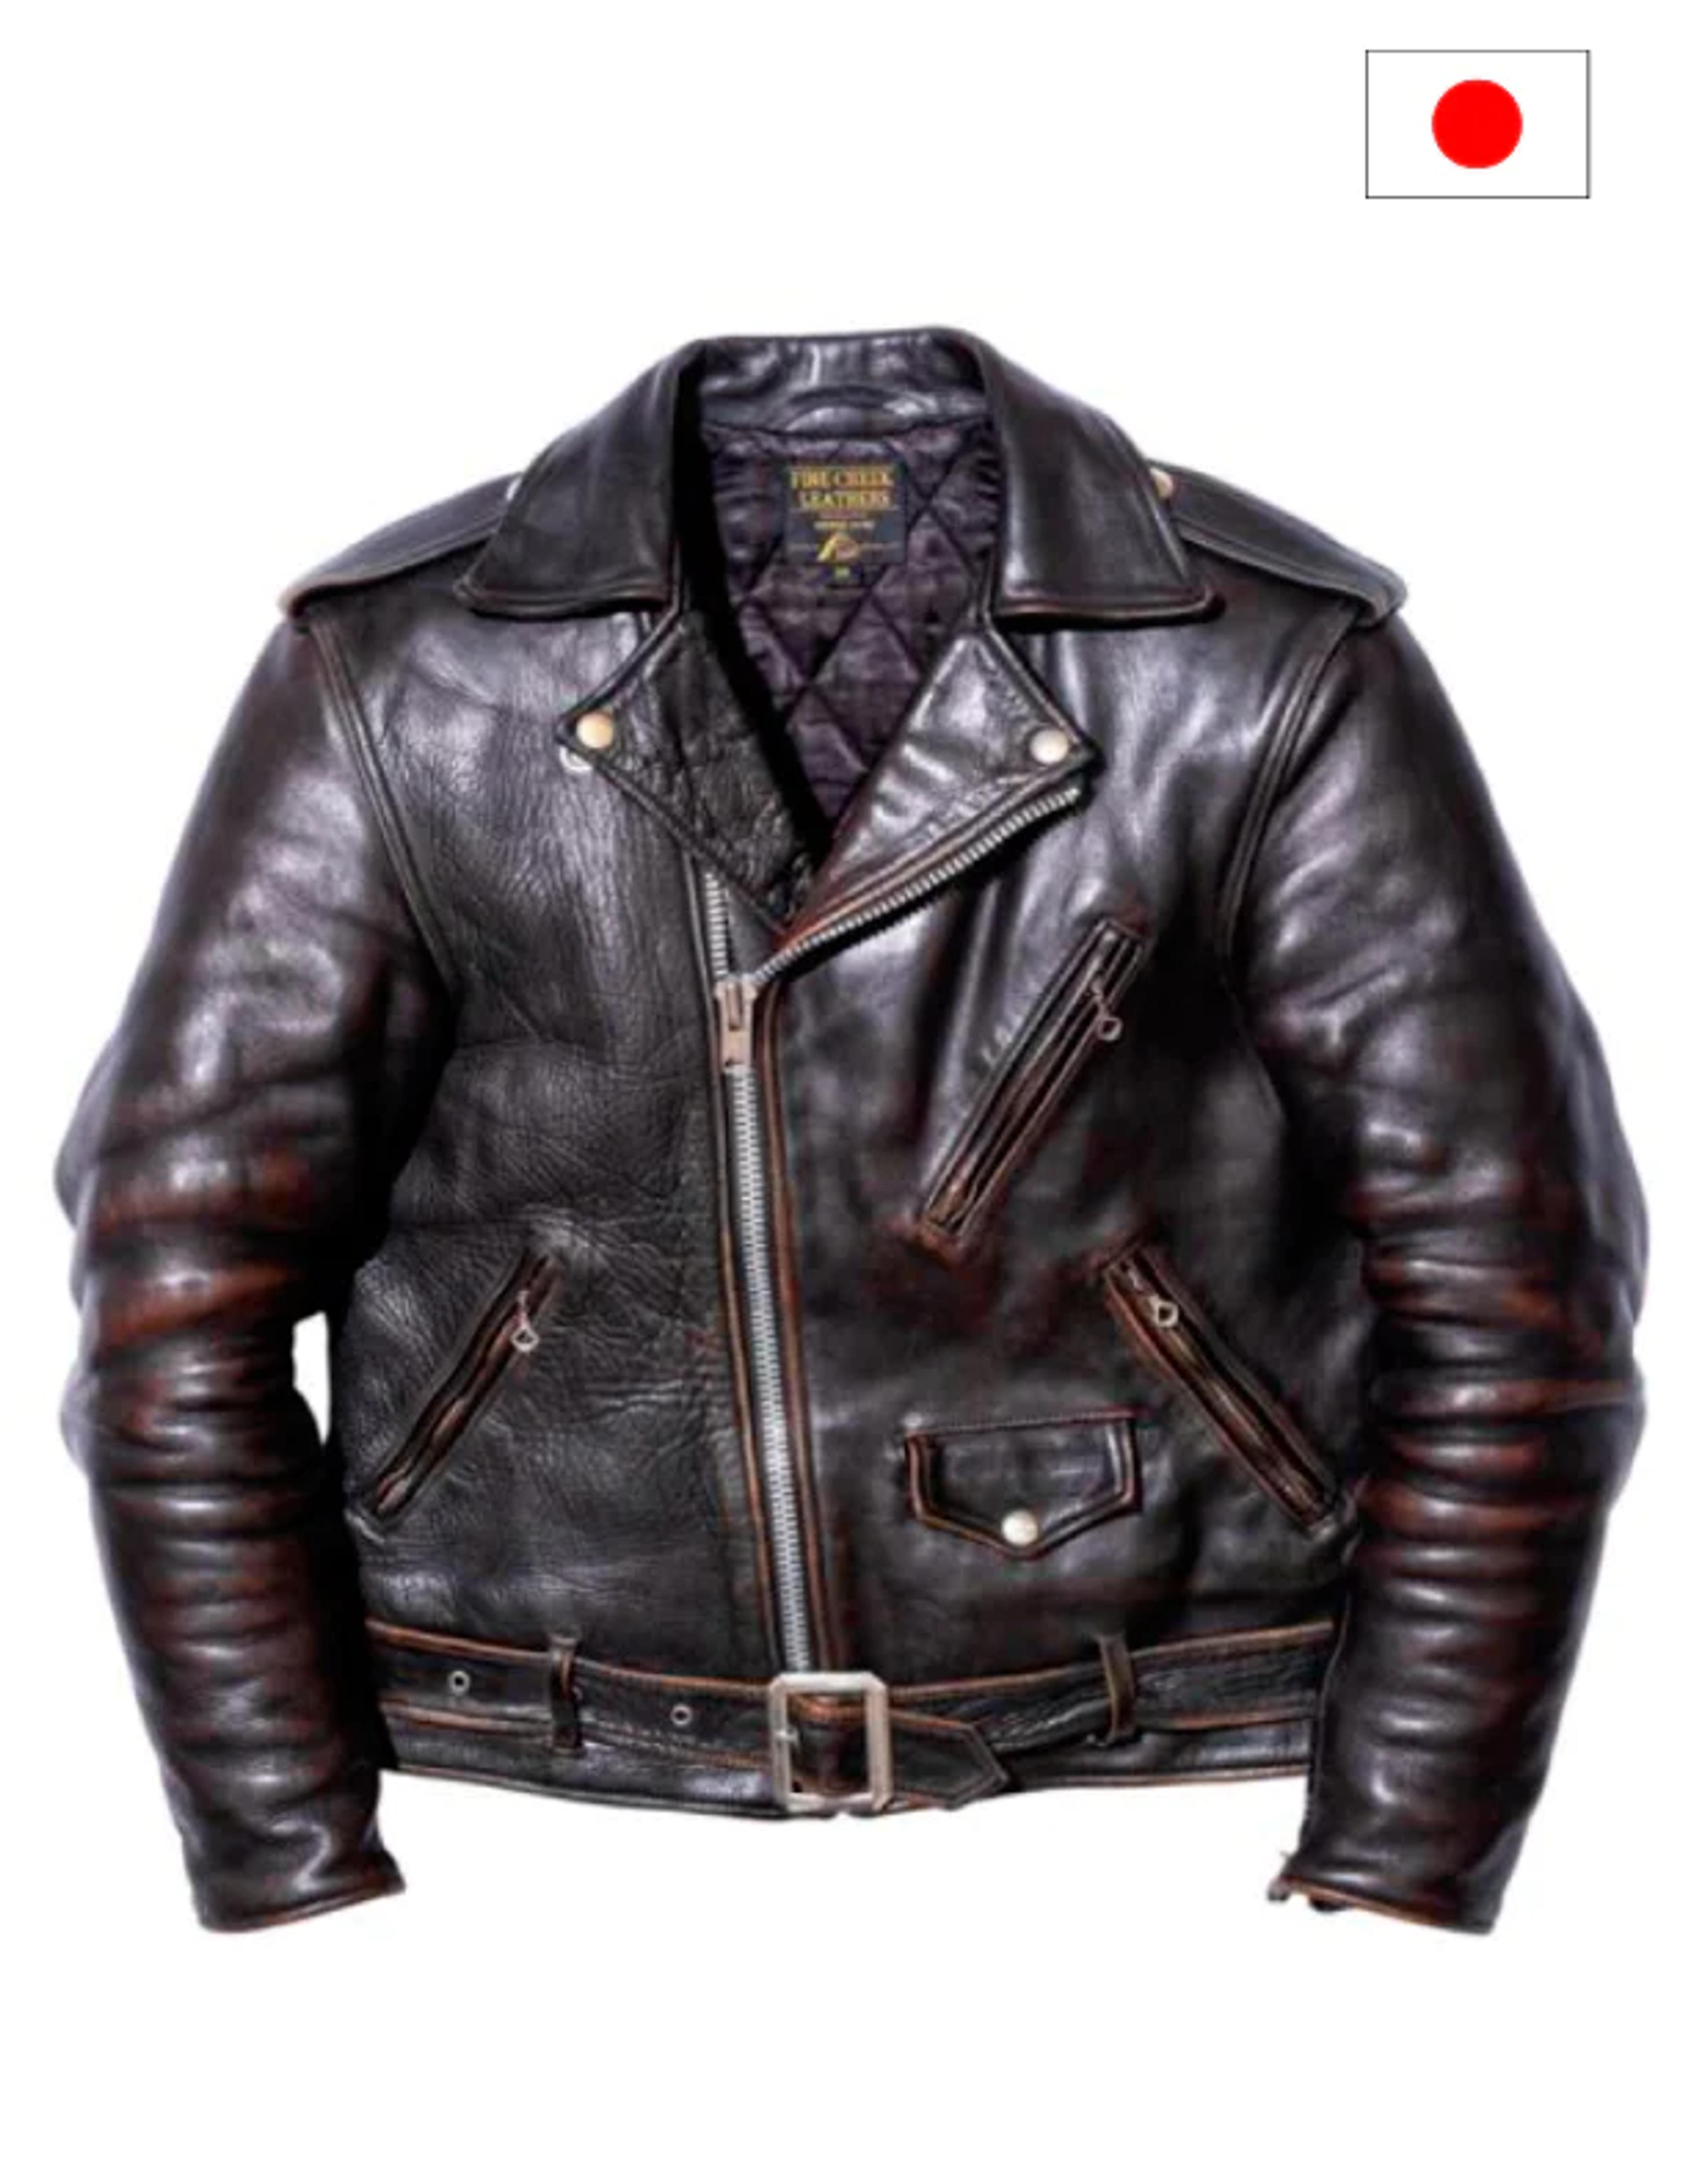 Fine Creek Leathers Leon No Star Japanese Horsehide Leather Jacket - The Shop Vancouver